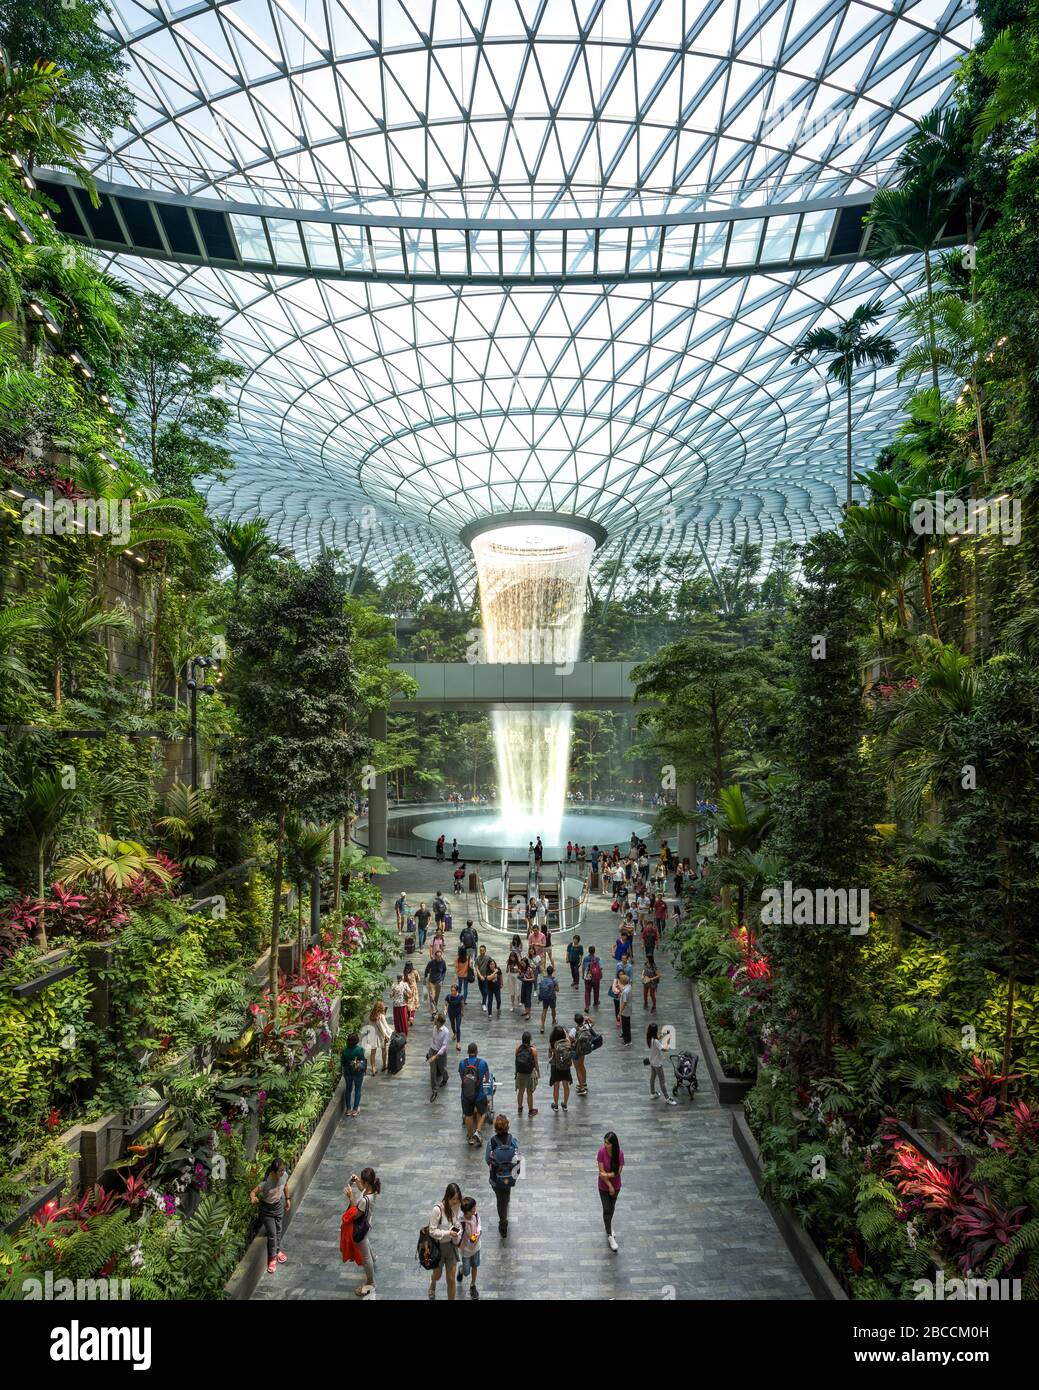 Singapore-30 Aug 2019: Jewel Changi Airport is a new terminal building under a glass dome, with indoor waterfall and tropical forest, shopping malls a Stock Photo